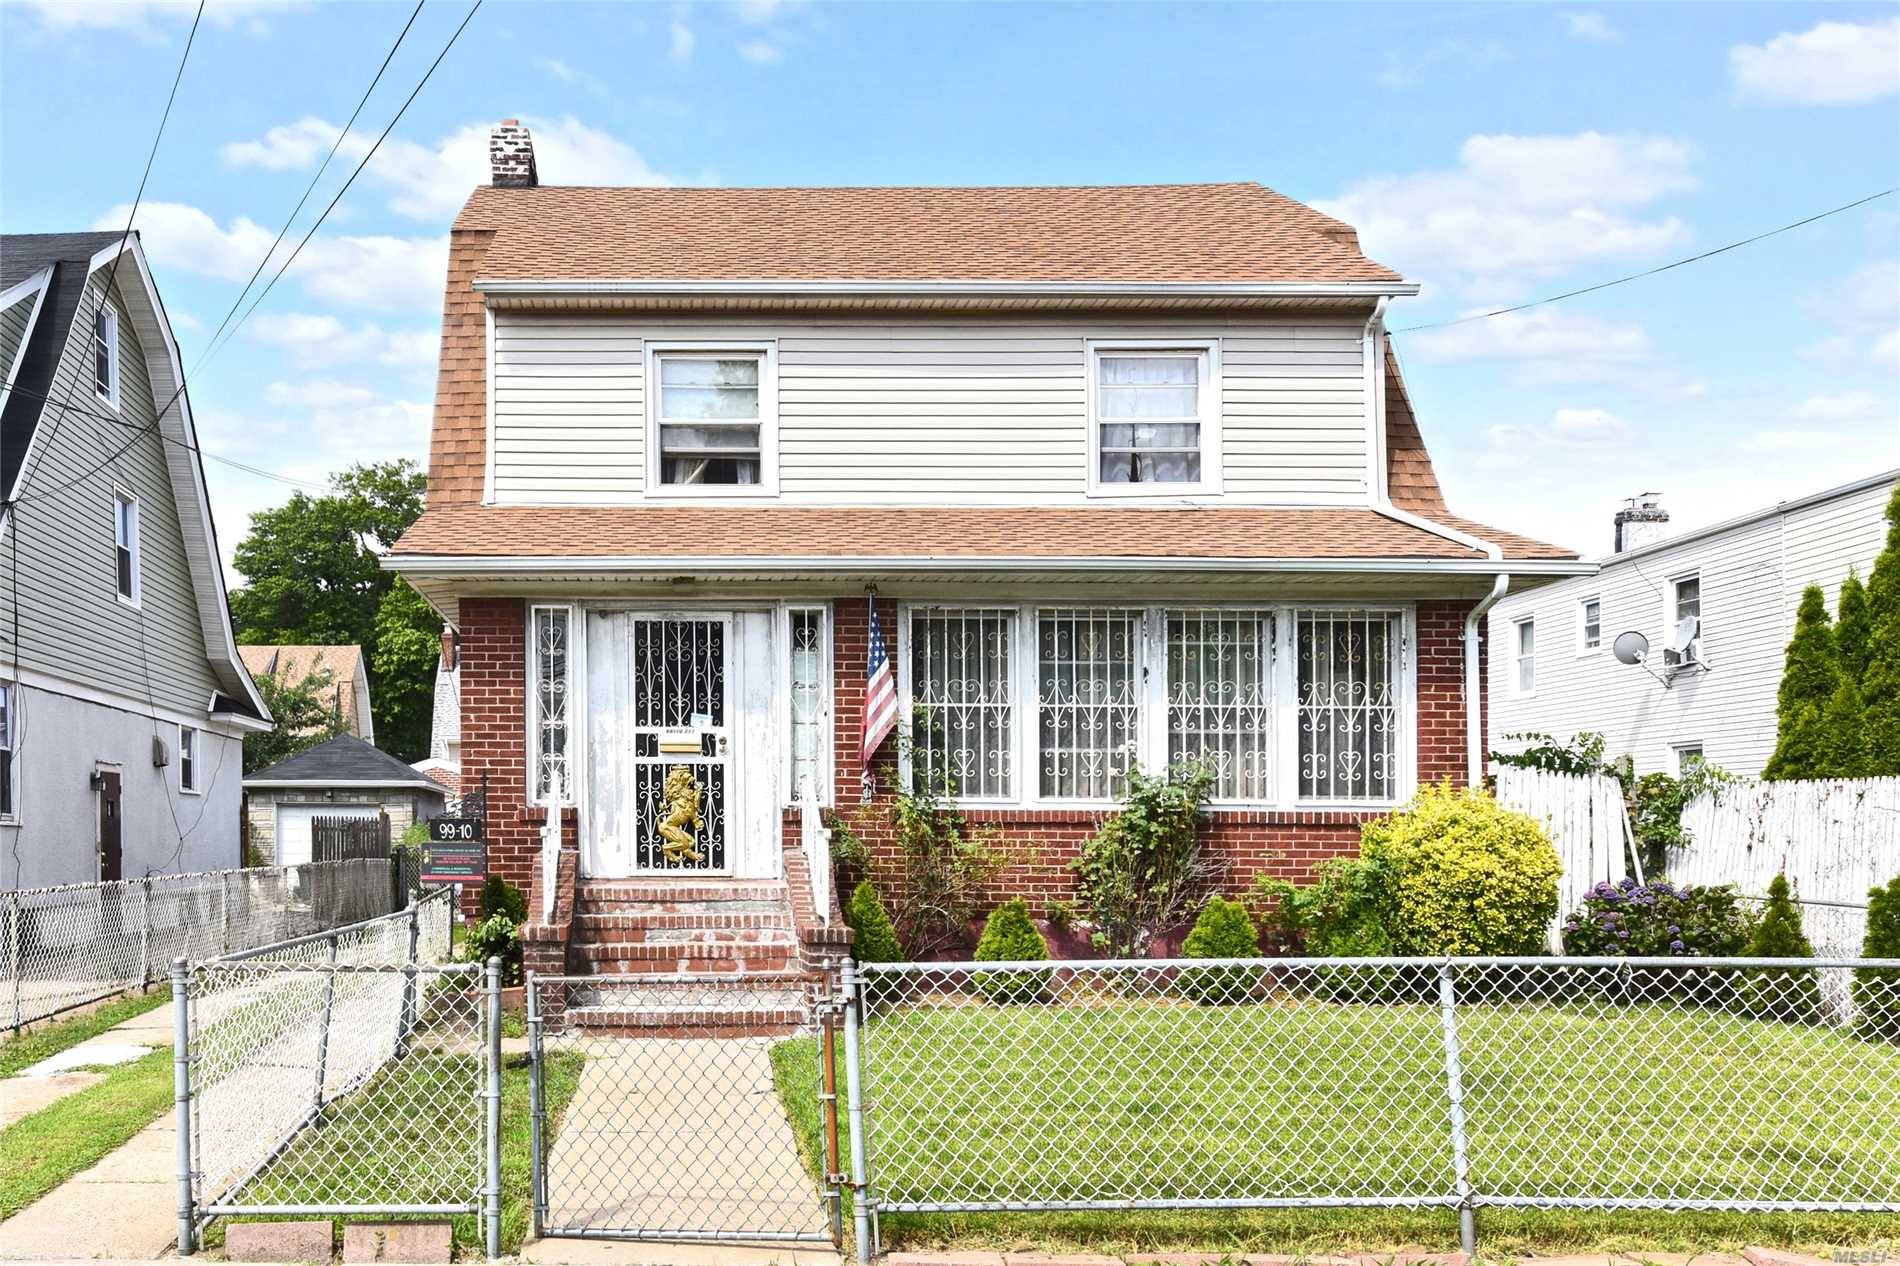 Spacious 4 Bedroom Detached Colonial House With Private Driveway And Two Car Garage In Queens Village.